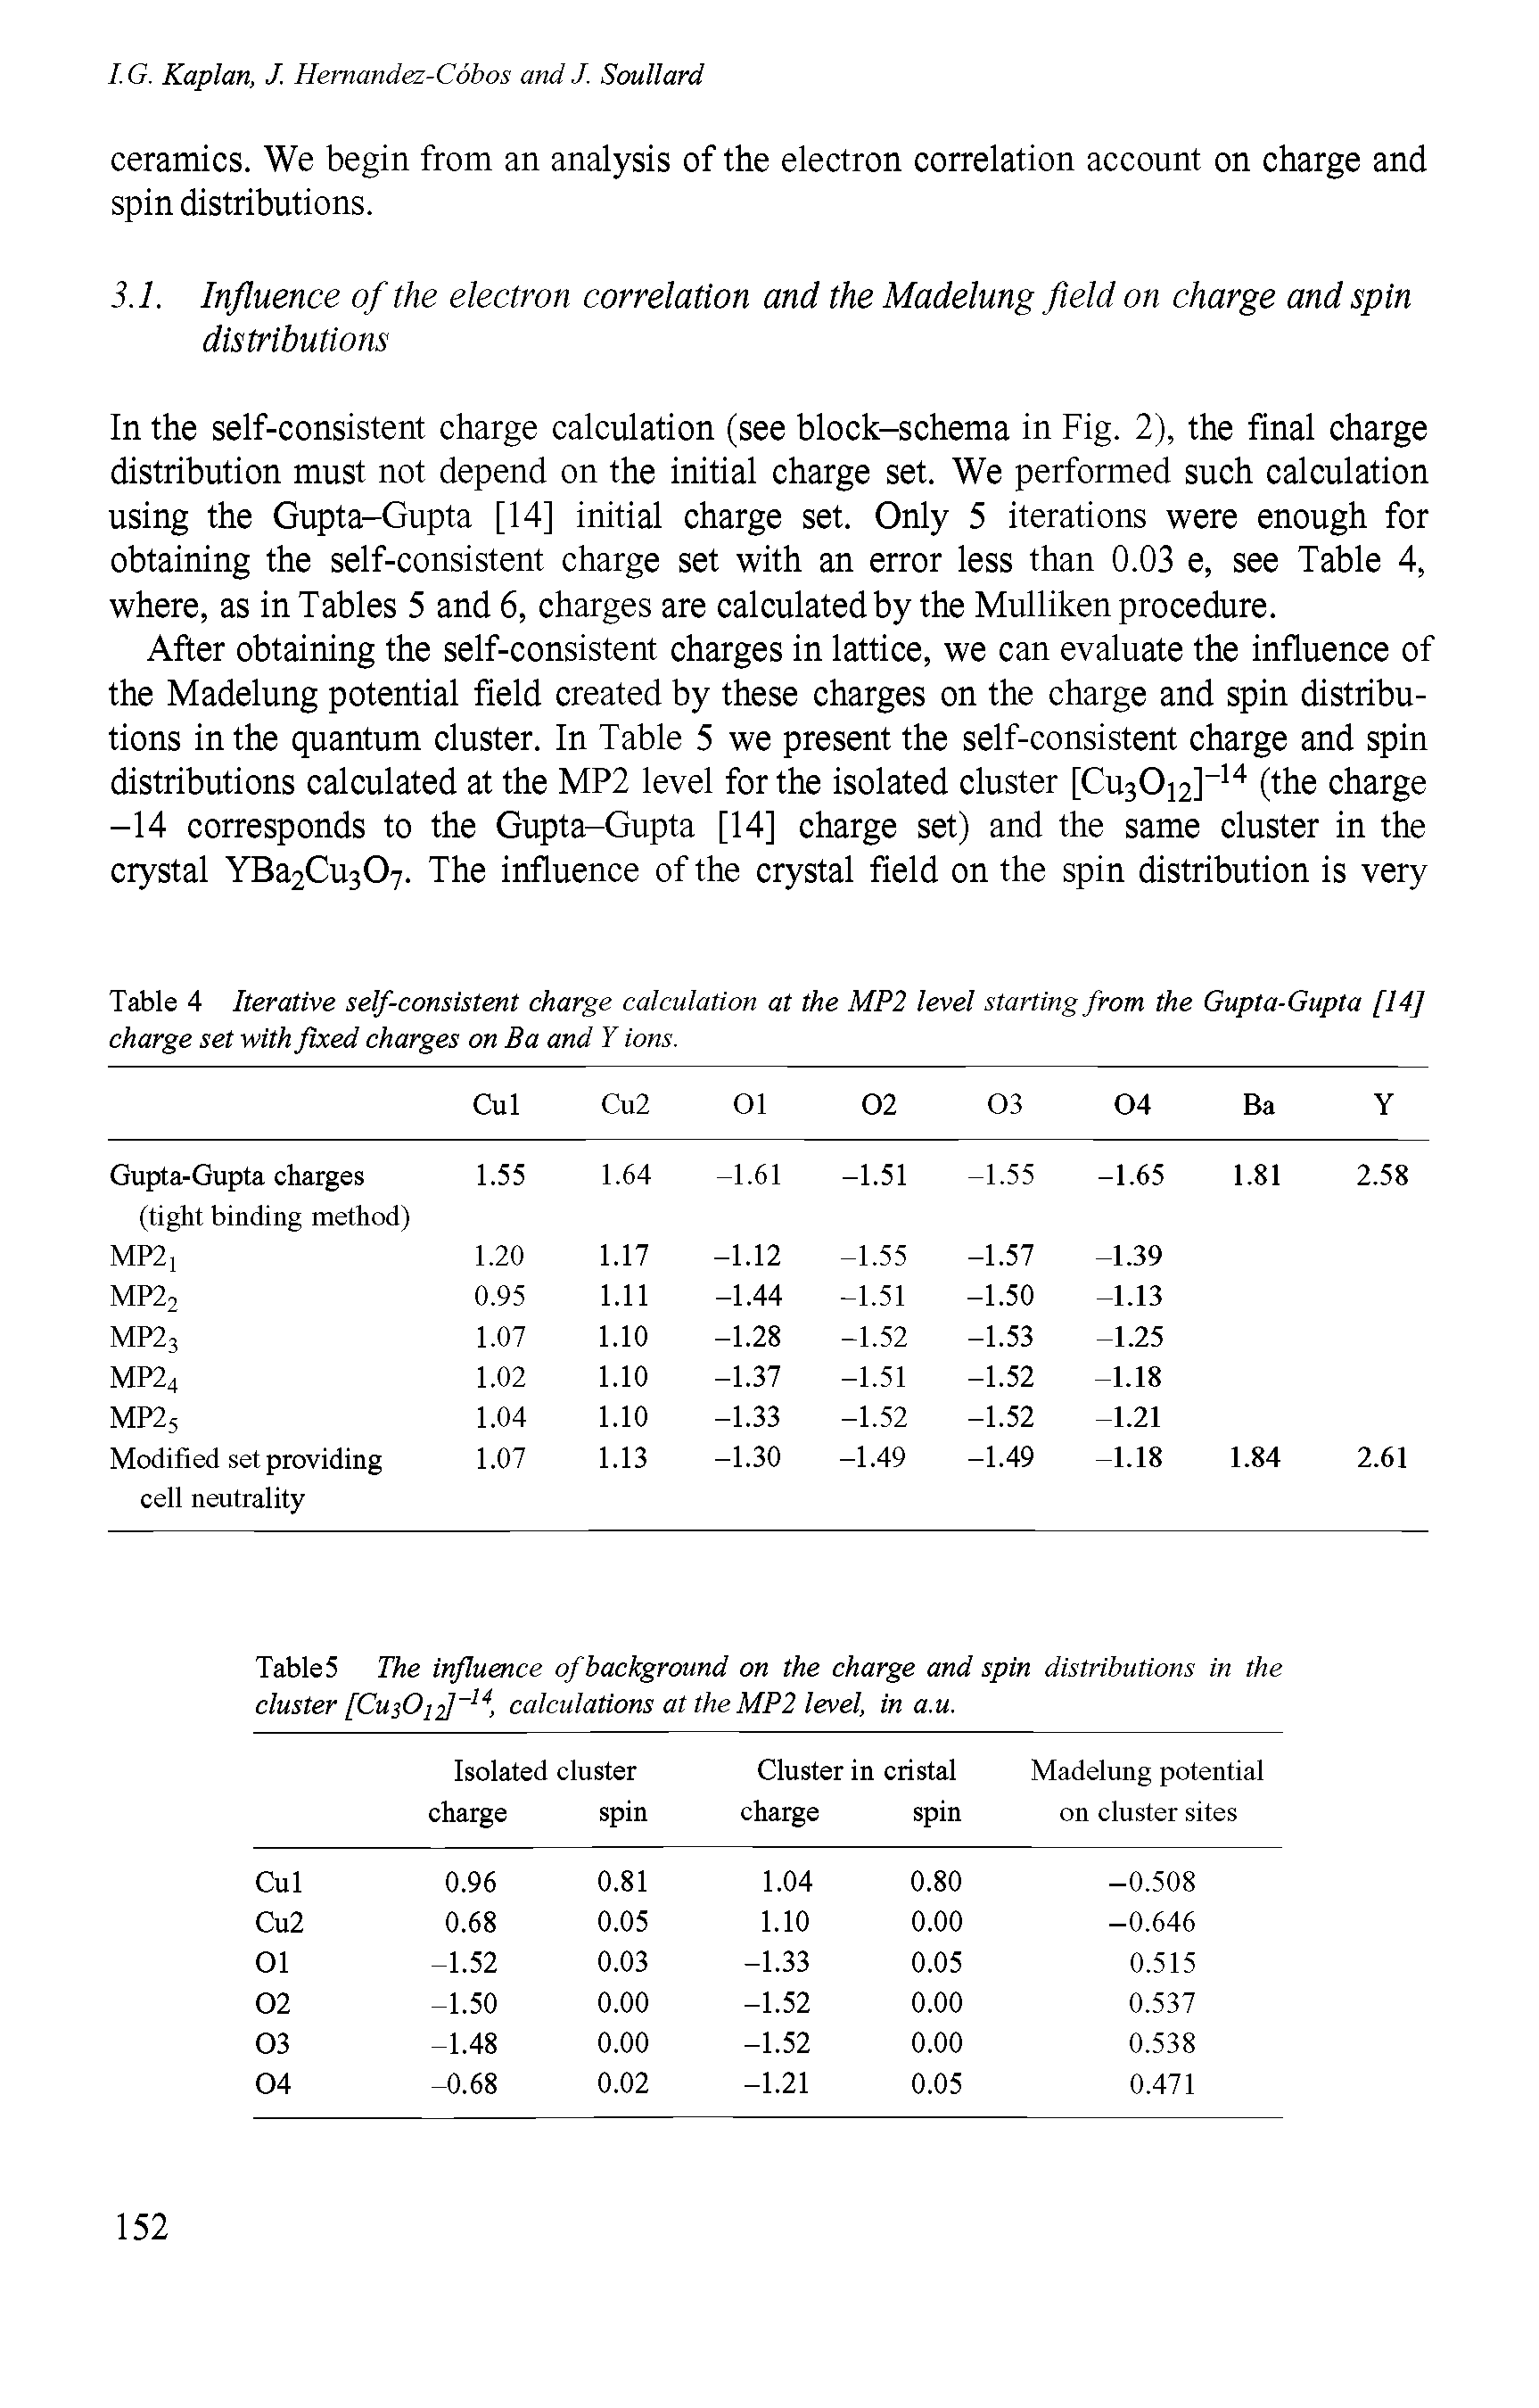 Table 4 Iterative self-consistent charge calculation at the MP2 level starting from the Gupta-Gupta [14] charge set with fixed charges on Ba and Y ions.